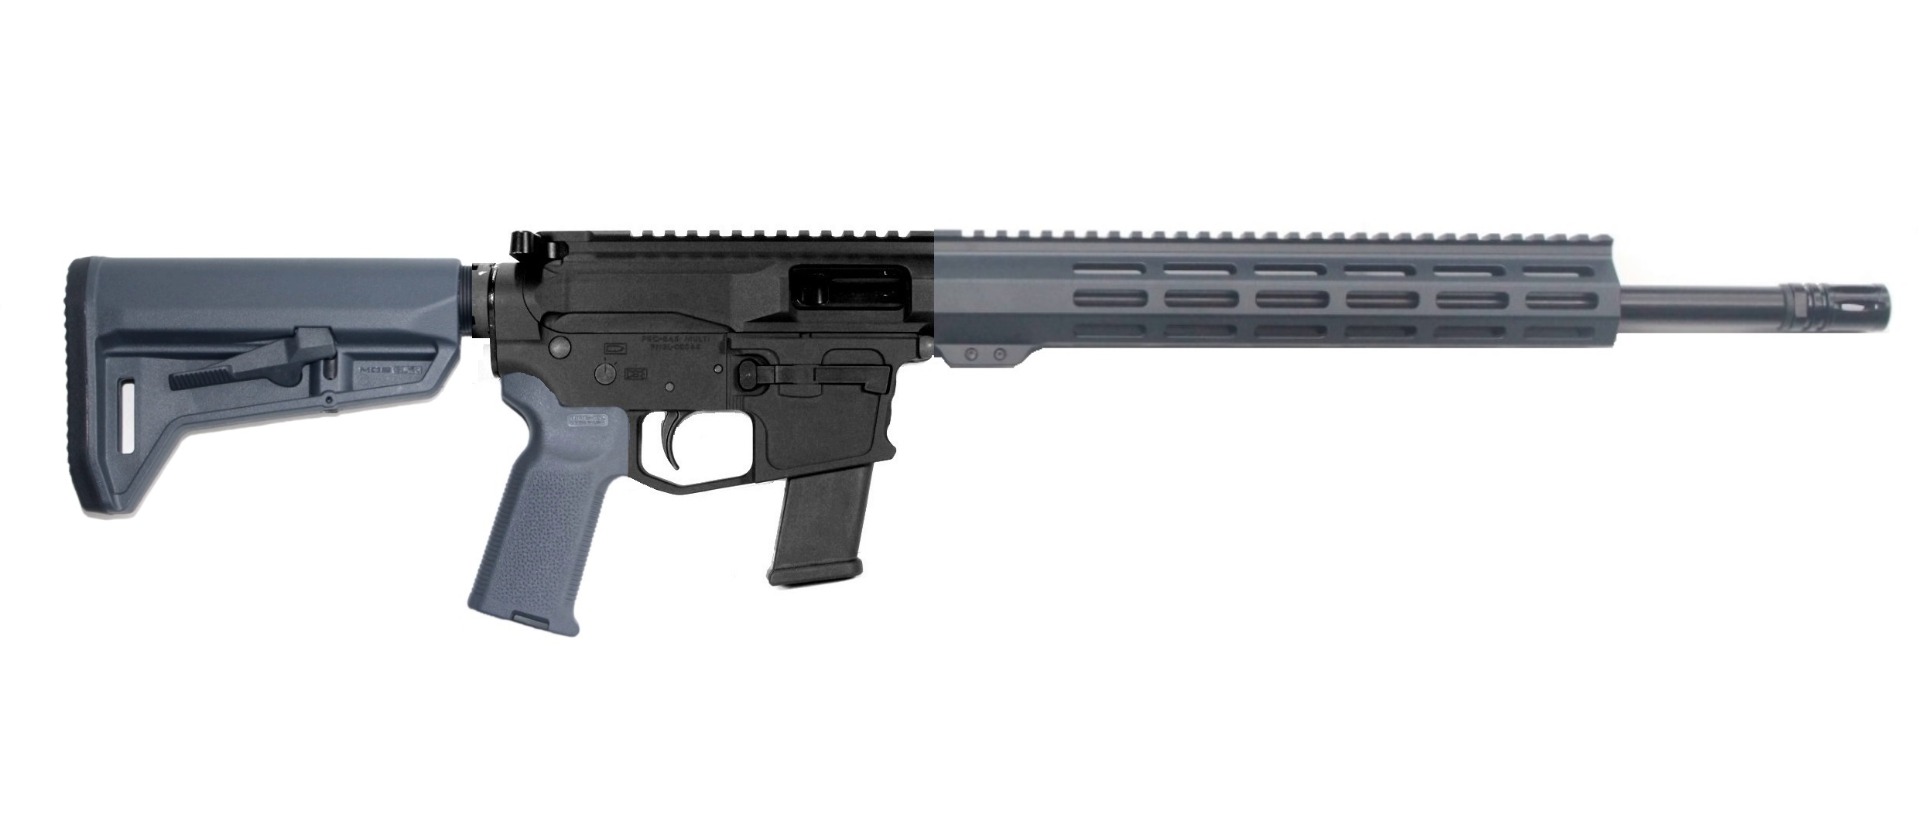 10.5 inch 40 S&W AR-15 Pistol | Made in the USA | Get One Today